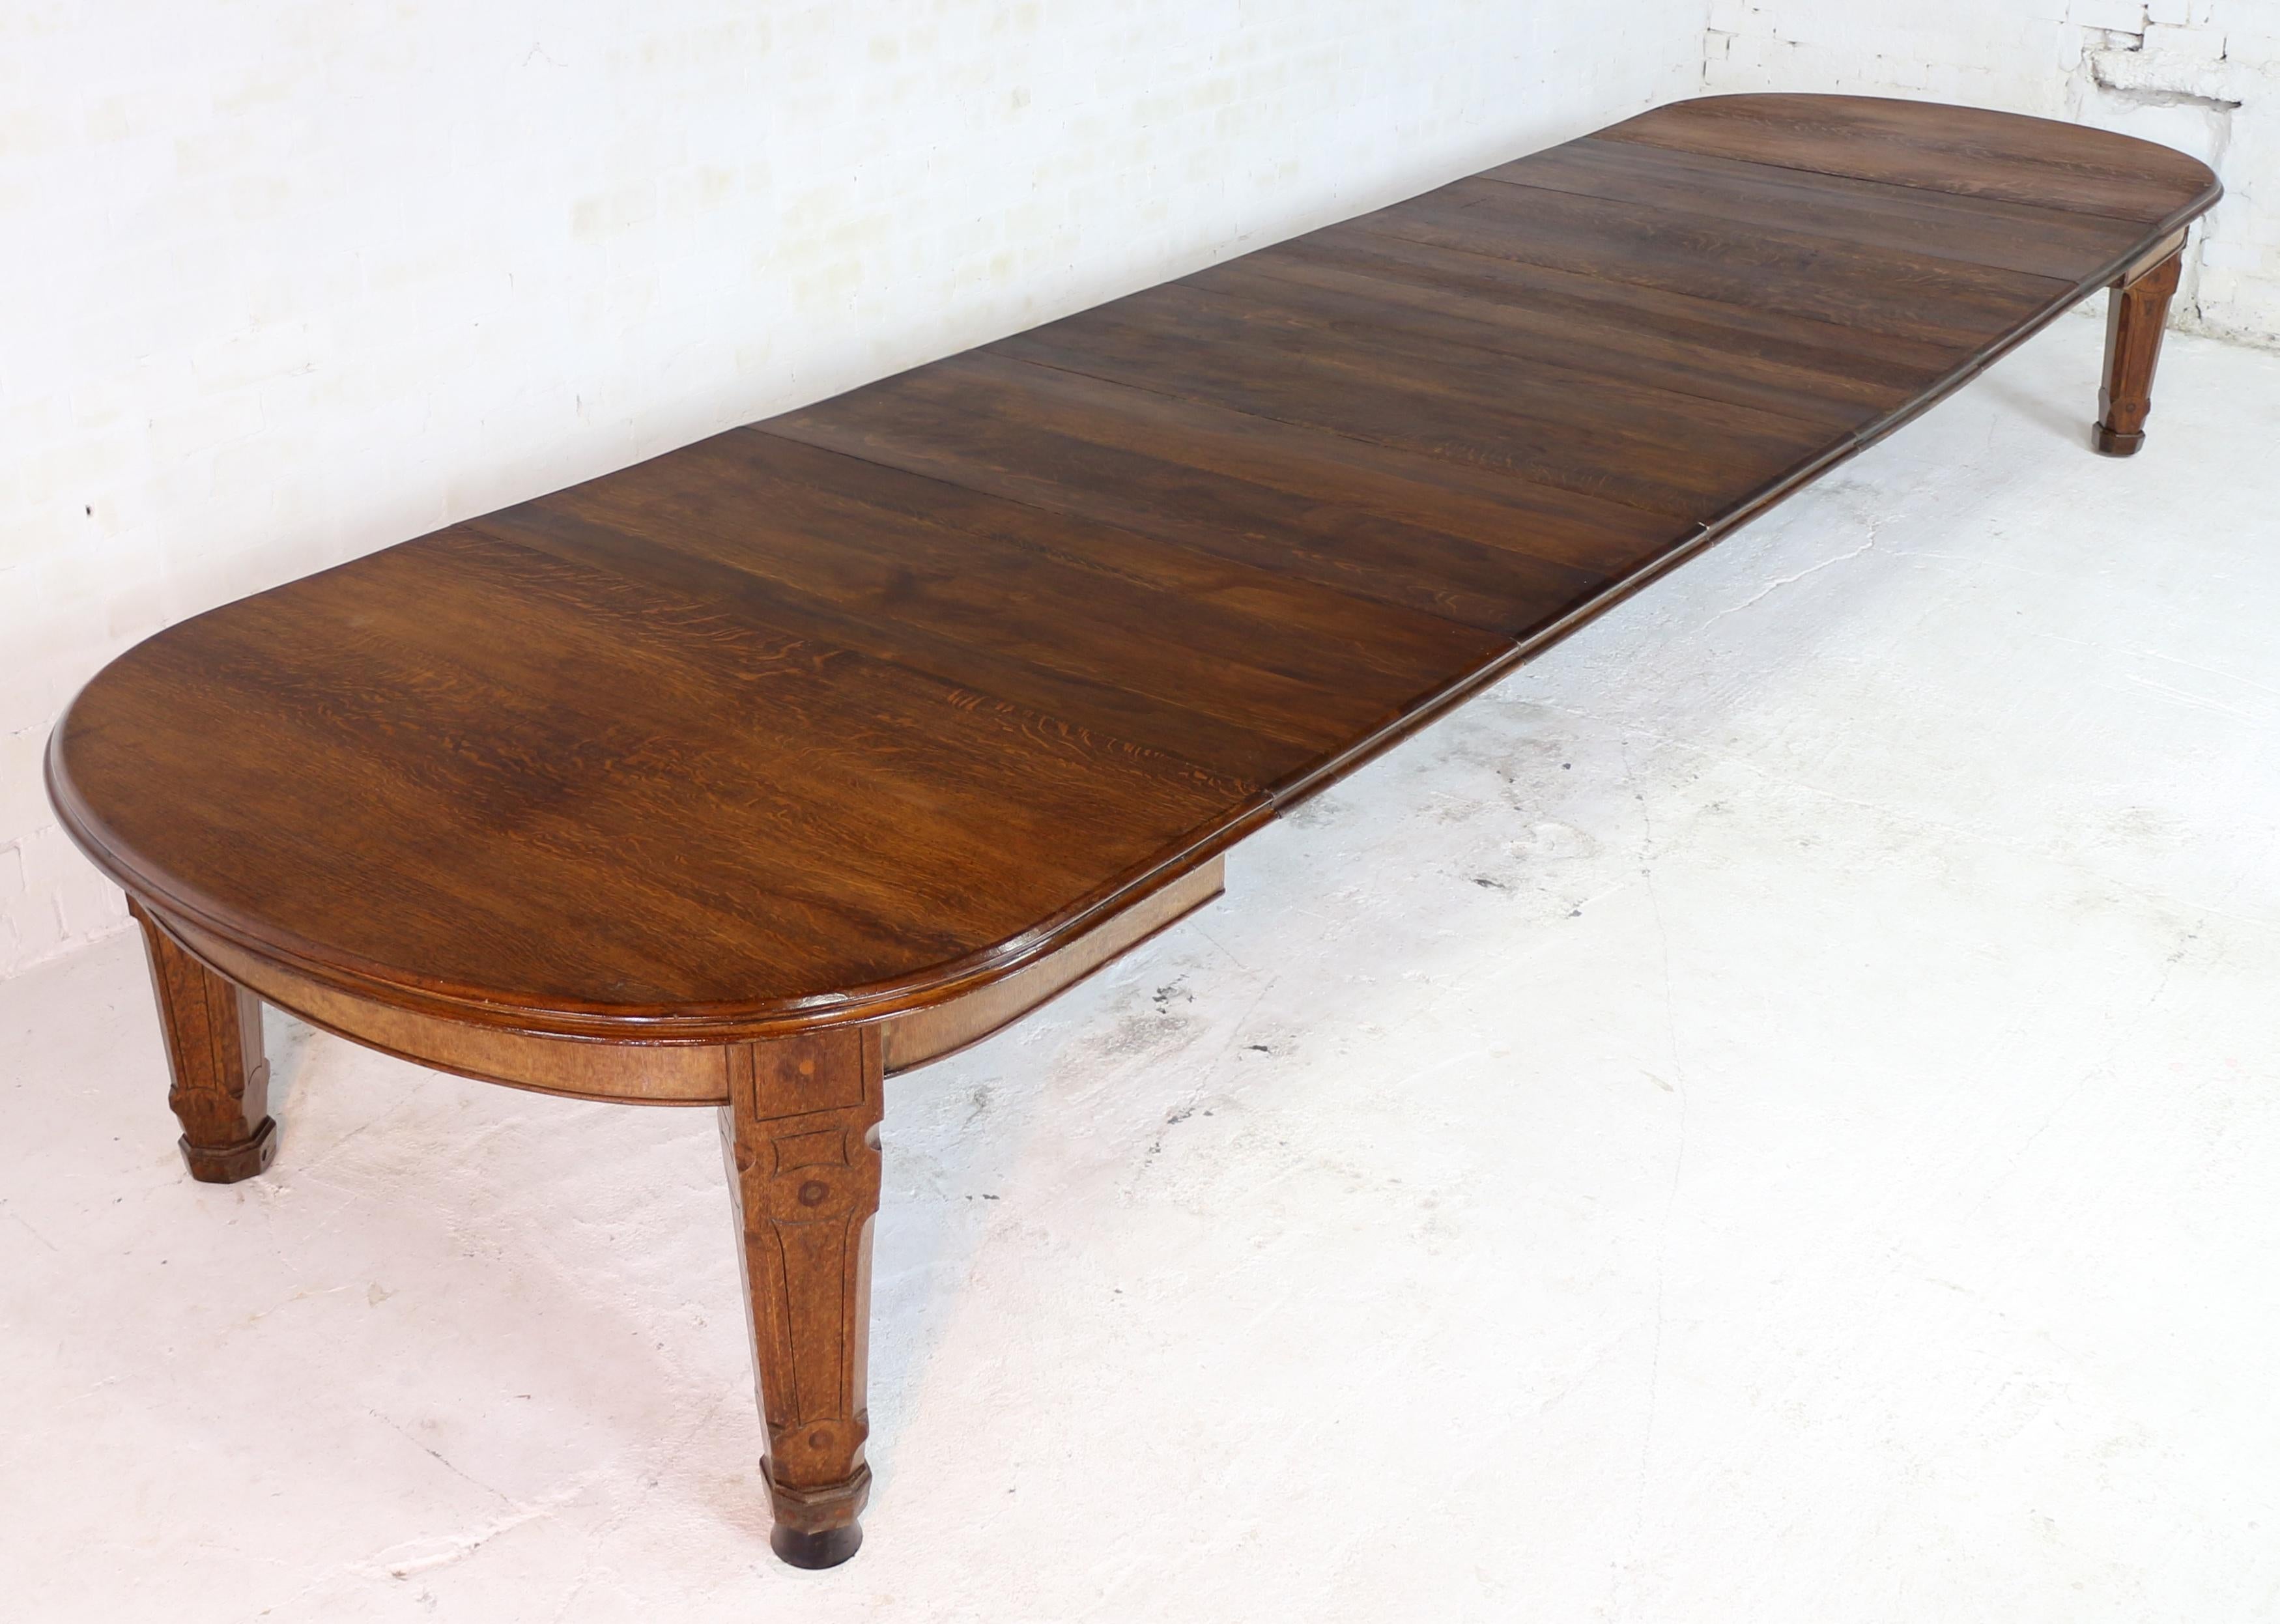 A rare Arts & Crafts inlaid Gothic Revival 18 1/2ft wind-out dining table, probably designed by Charles Bevan and made by Gillows of Lancaster. In quarter-sawn oak and with seven leaves, this large 5ft wide table smoothly extends from 6ft 6.5in to